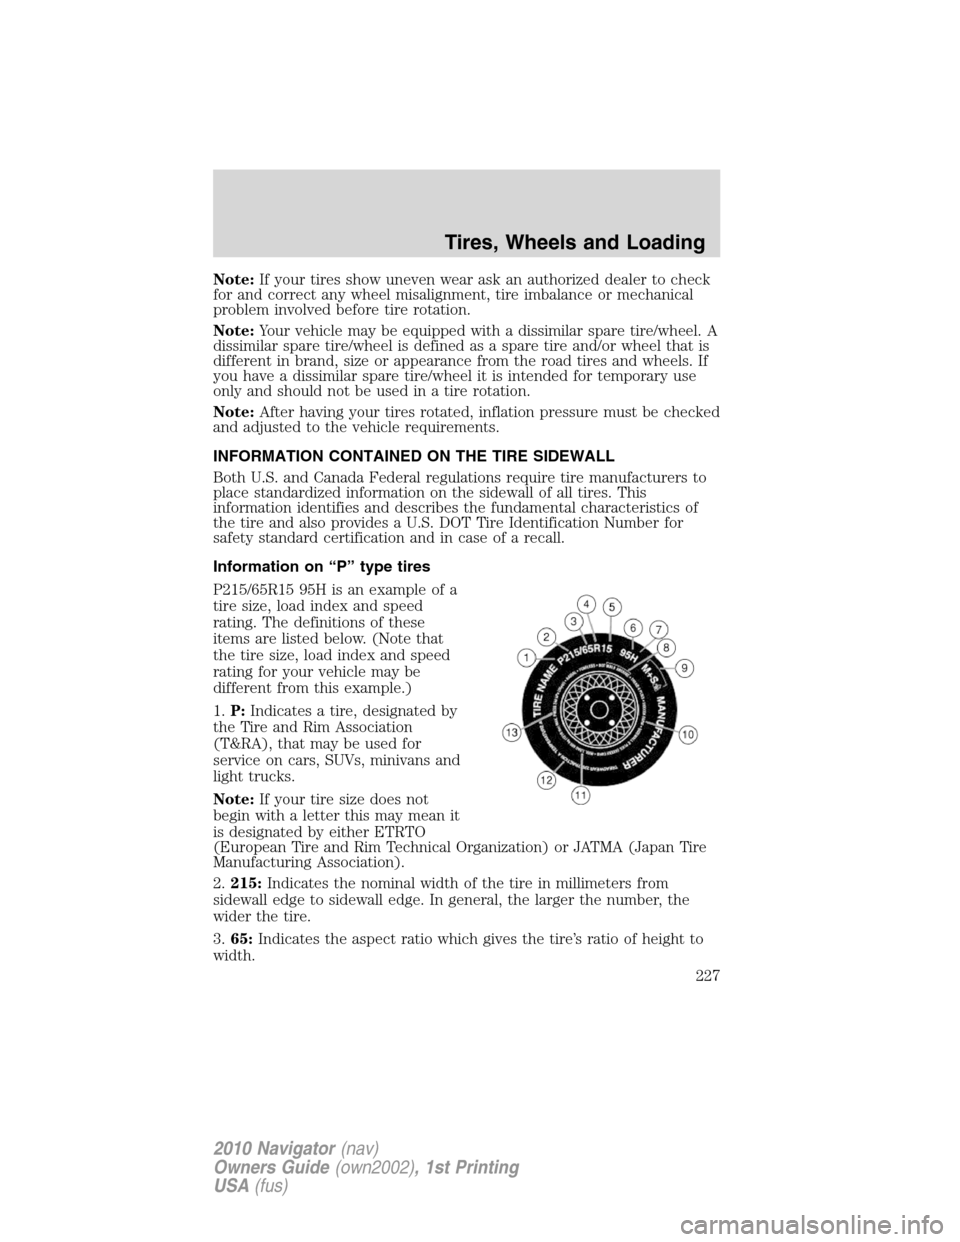 LINCOLN NAVIGATOR 2010  Owners Manual Note:If your tires show uneven wear ask an authorized dealer to check
for and correct any wheel misalignment, tire imbalance or mechanical
problem involved before tire rotation.
Note:Your vehicle may 